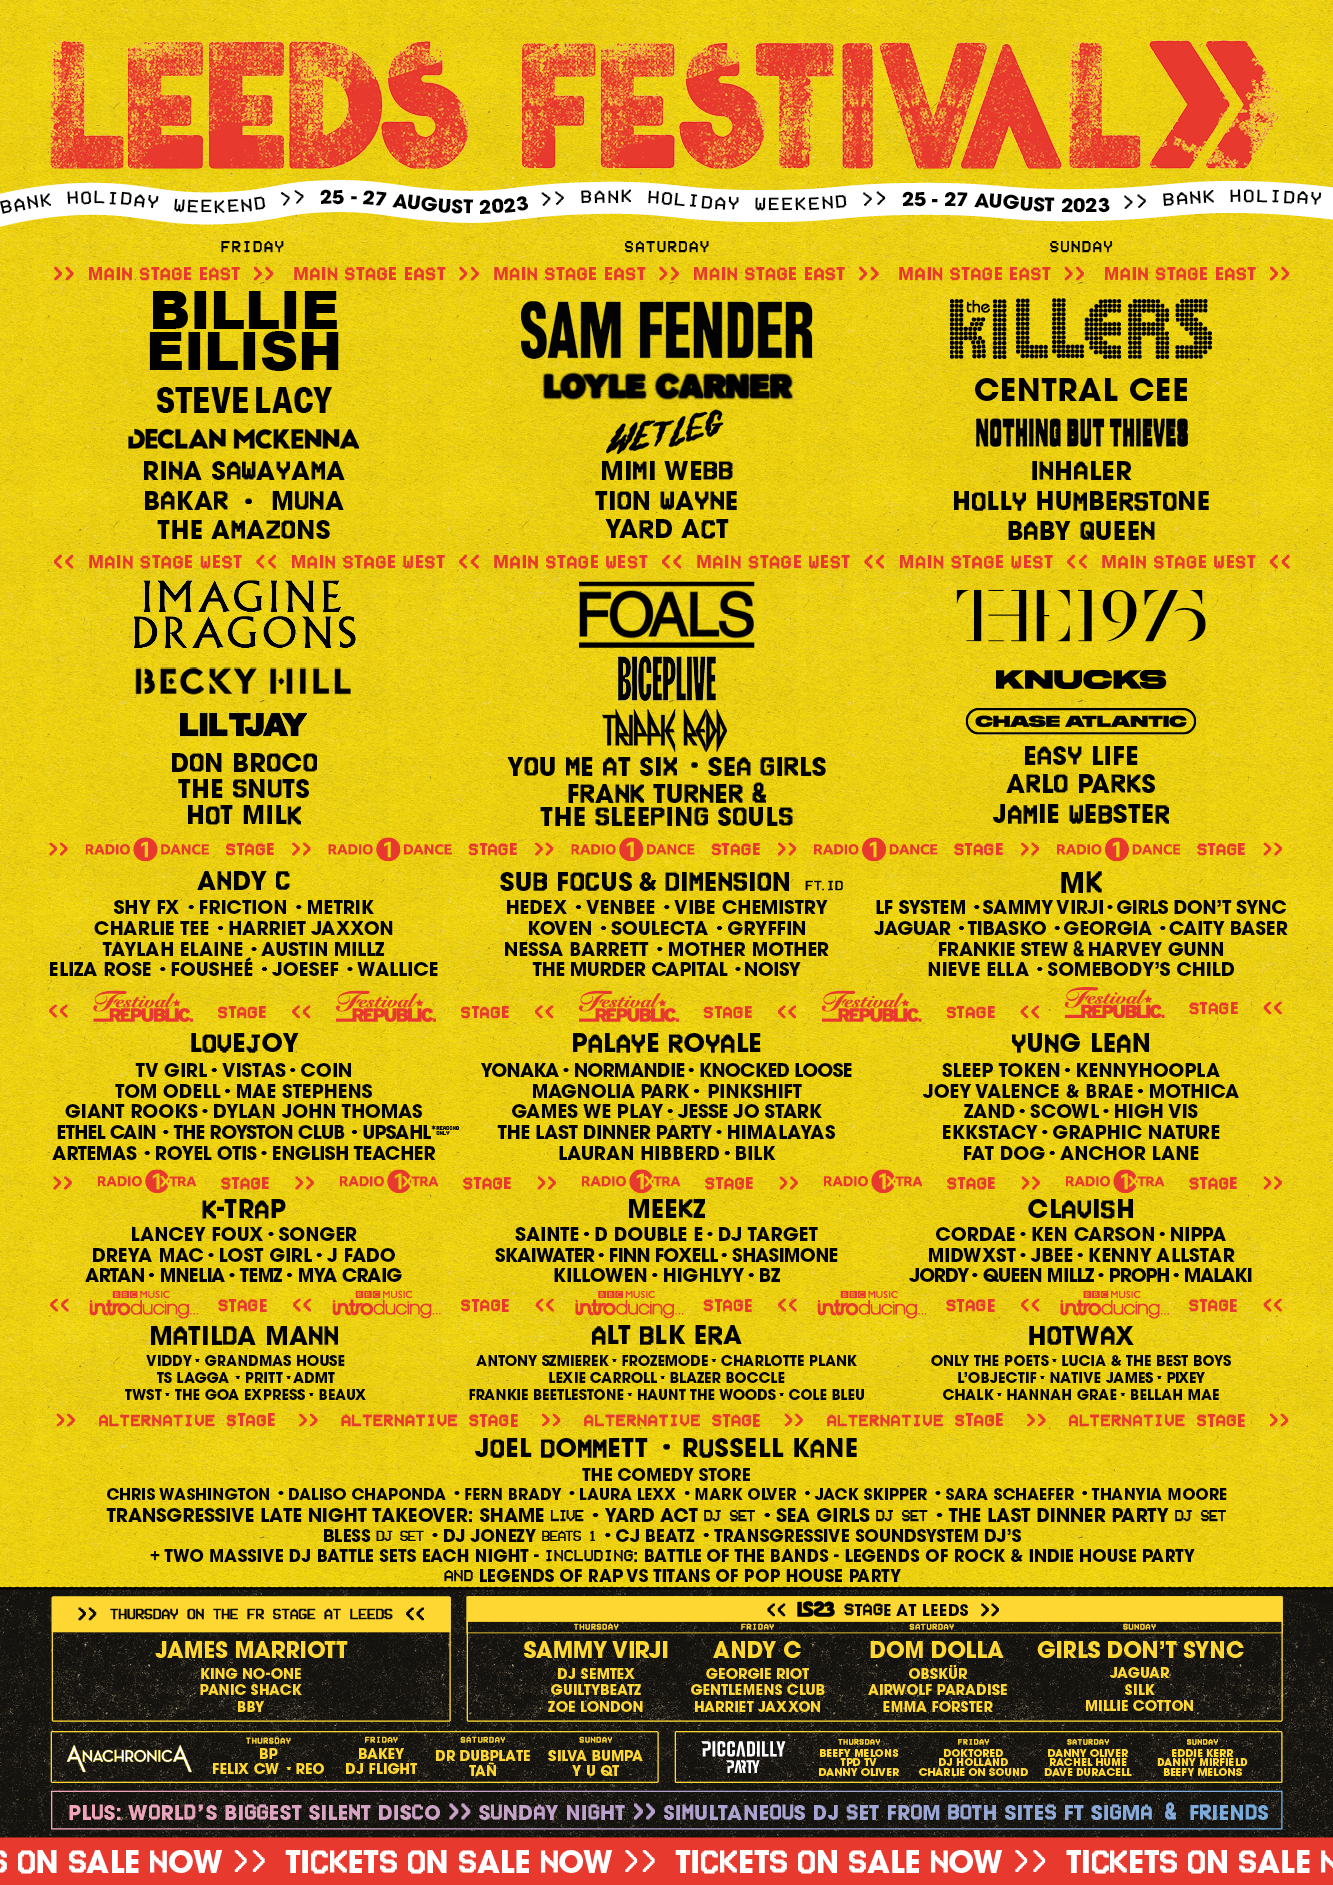 ONE MONTH TO GO UNTIL READING & LEEDS FESTIVAL 